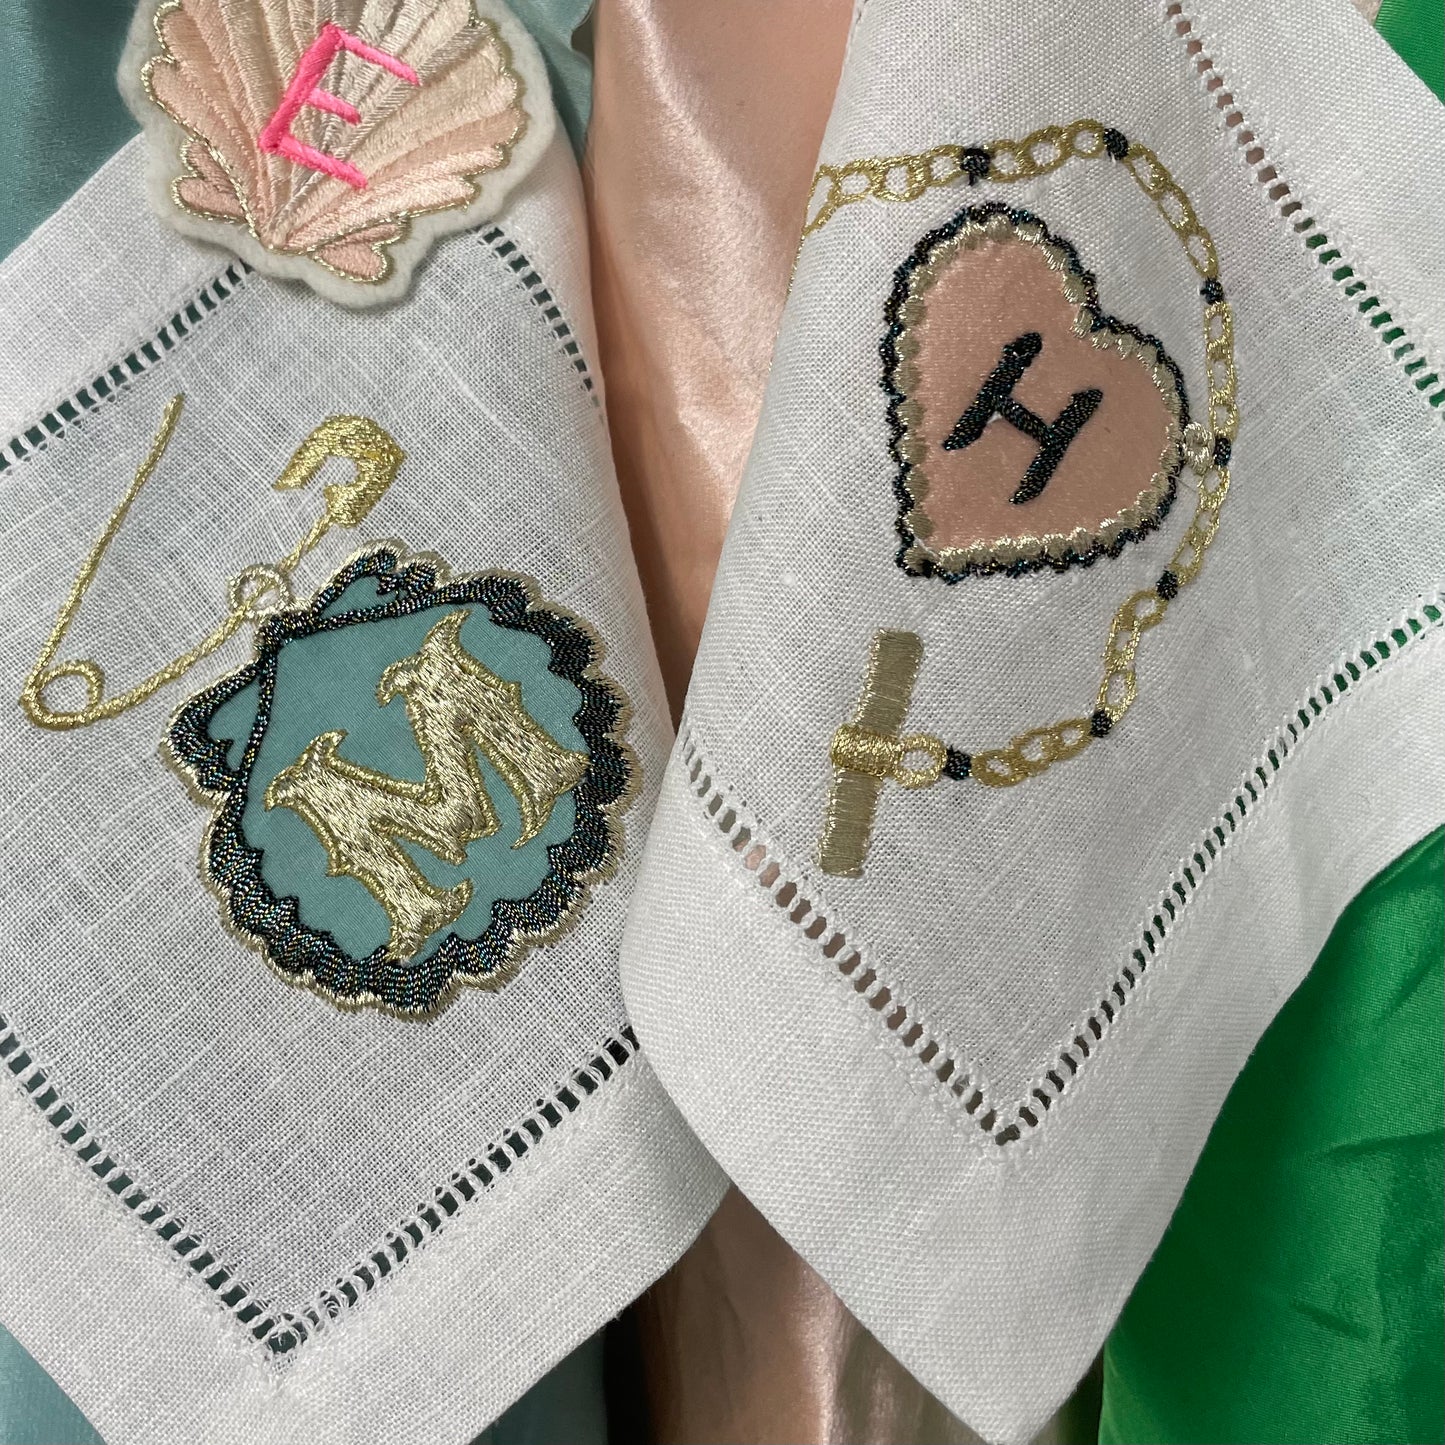 Two embroidered artworks from the Love Token collection, hanging over different colour fabrics